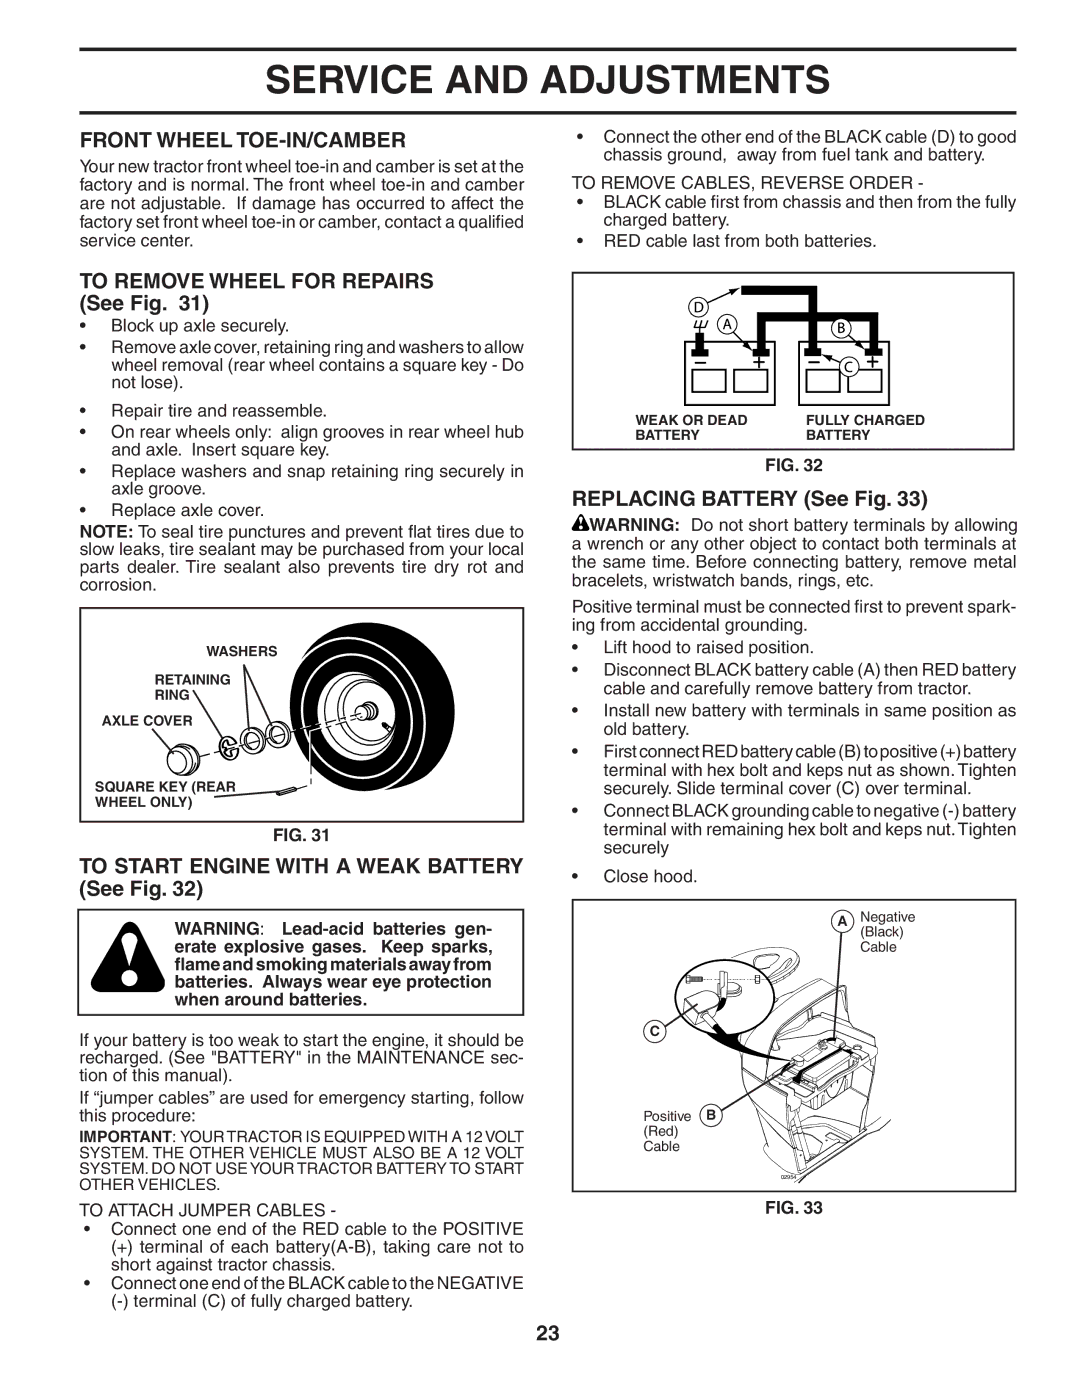 Husqvarna YTH1848XPT owner manual Front Wheel TOE-IN/CAMBER, To Remove Wheel for Repairs See Fig, Replacing Battery See Fig 